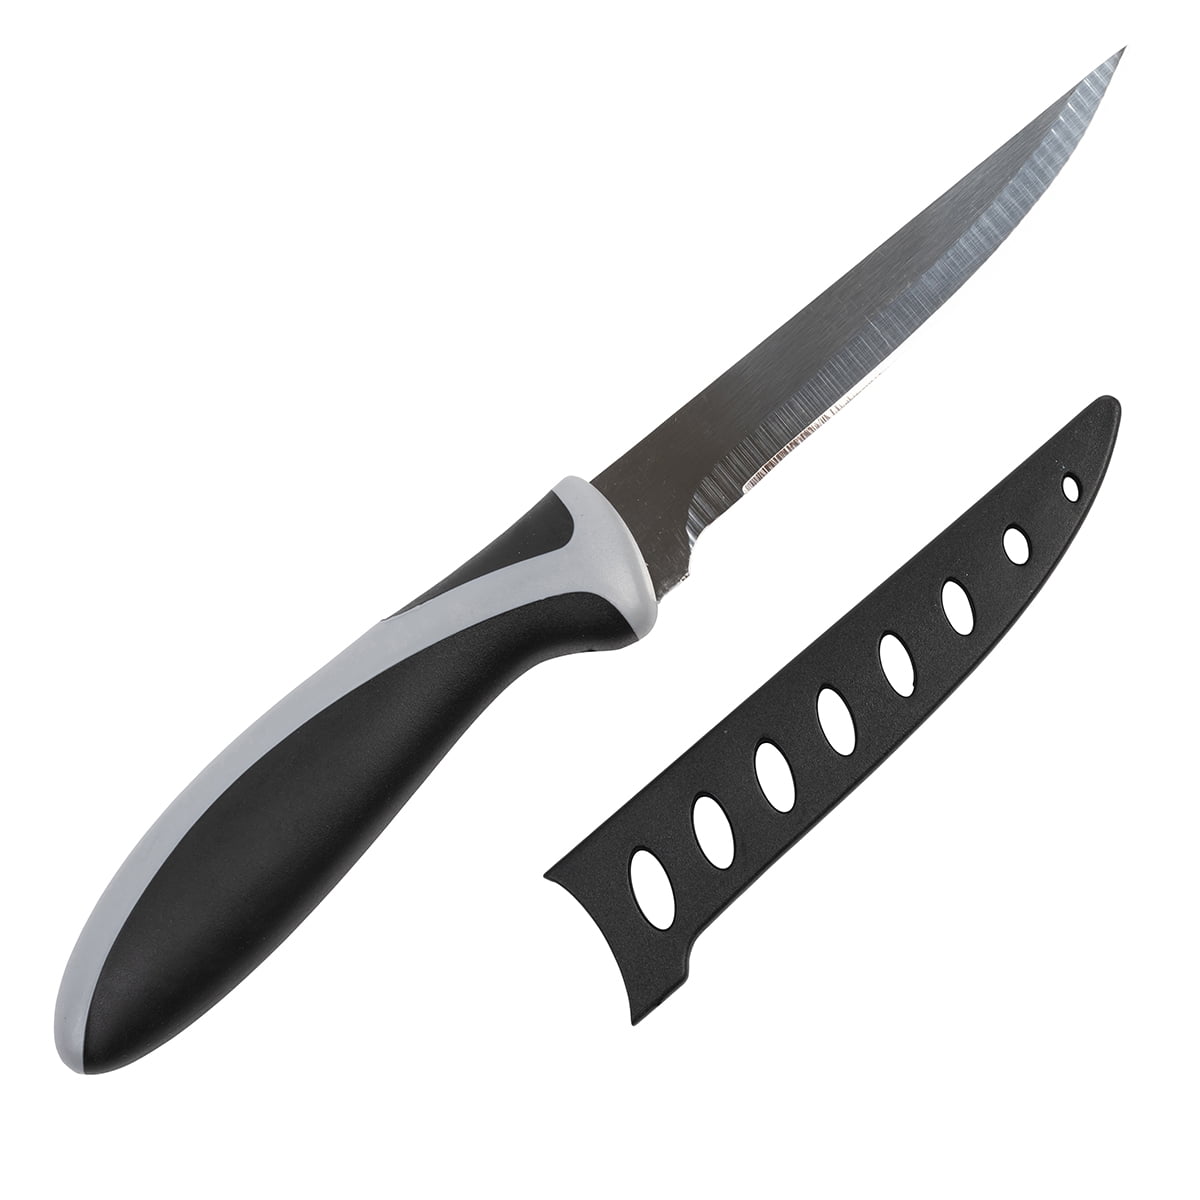 De x ter-Russell S133-8C Sani-Safe 8 Fillet Knife with Poly